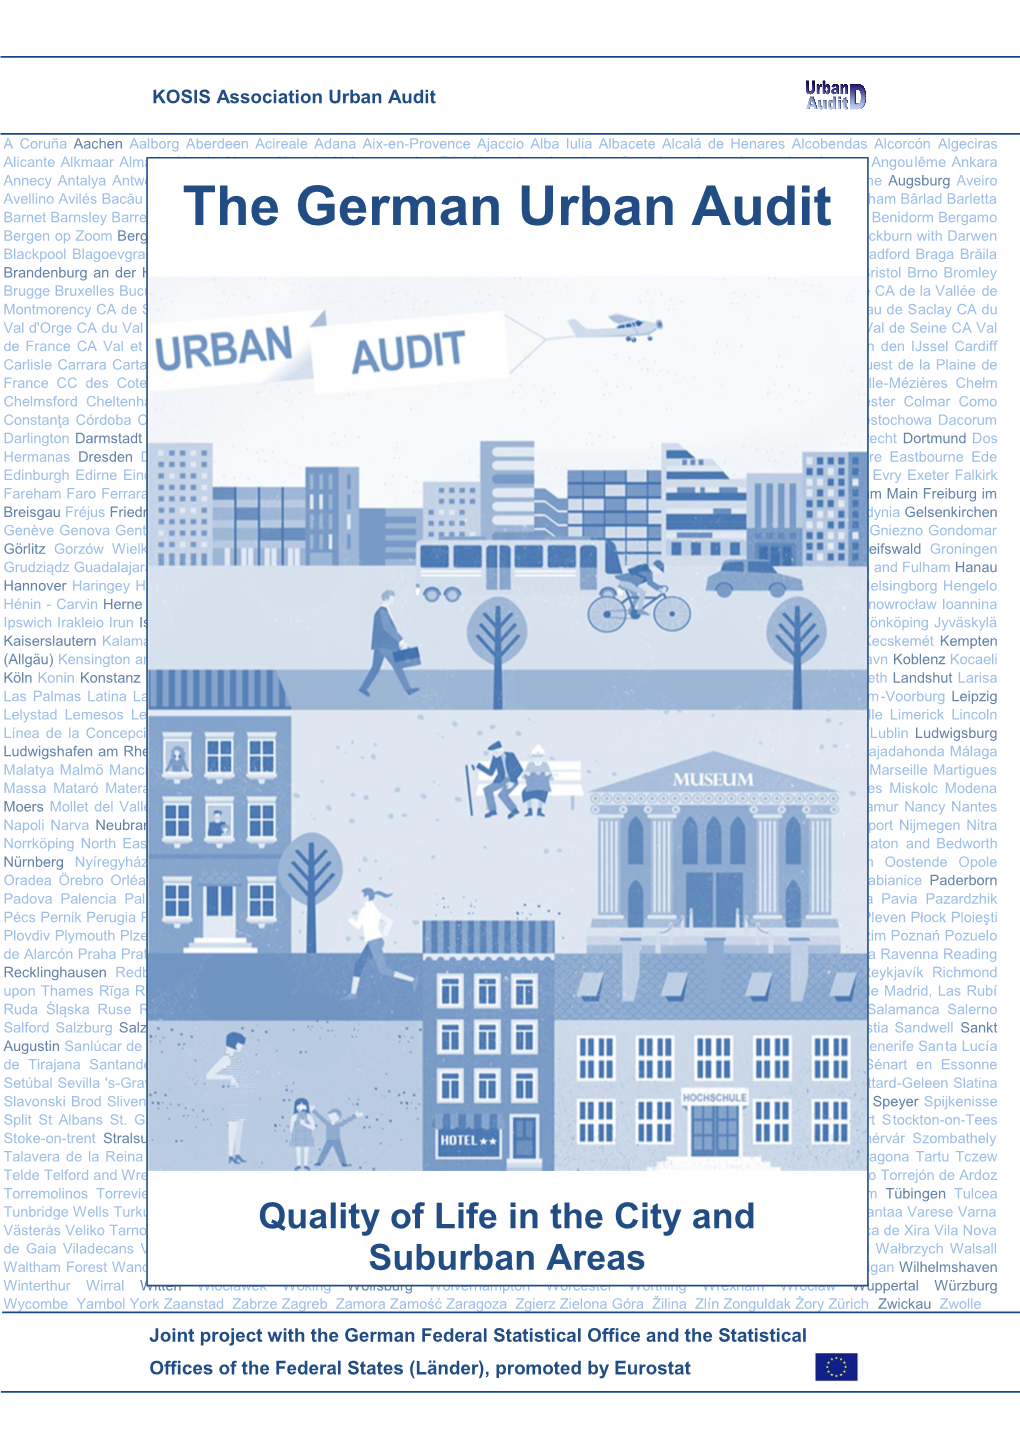 The German Urban Audit. Quality of Life in the City and Suburban Areas